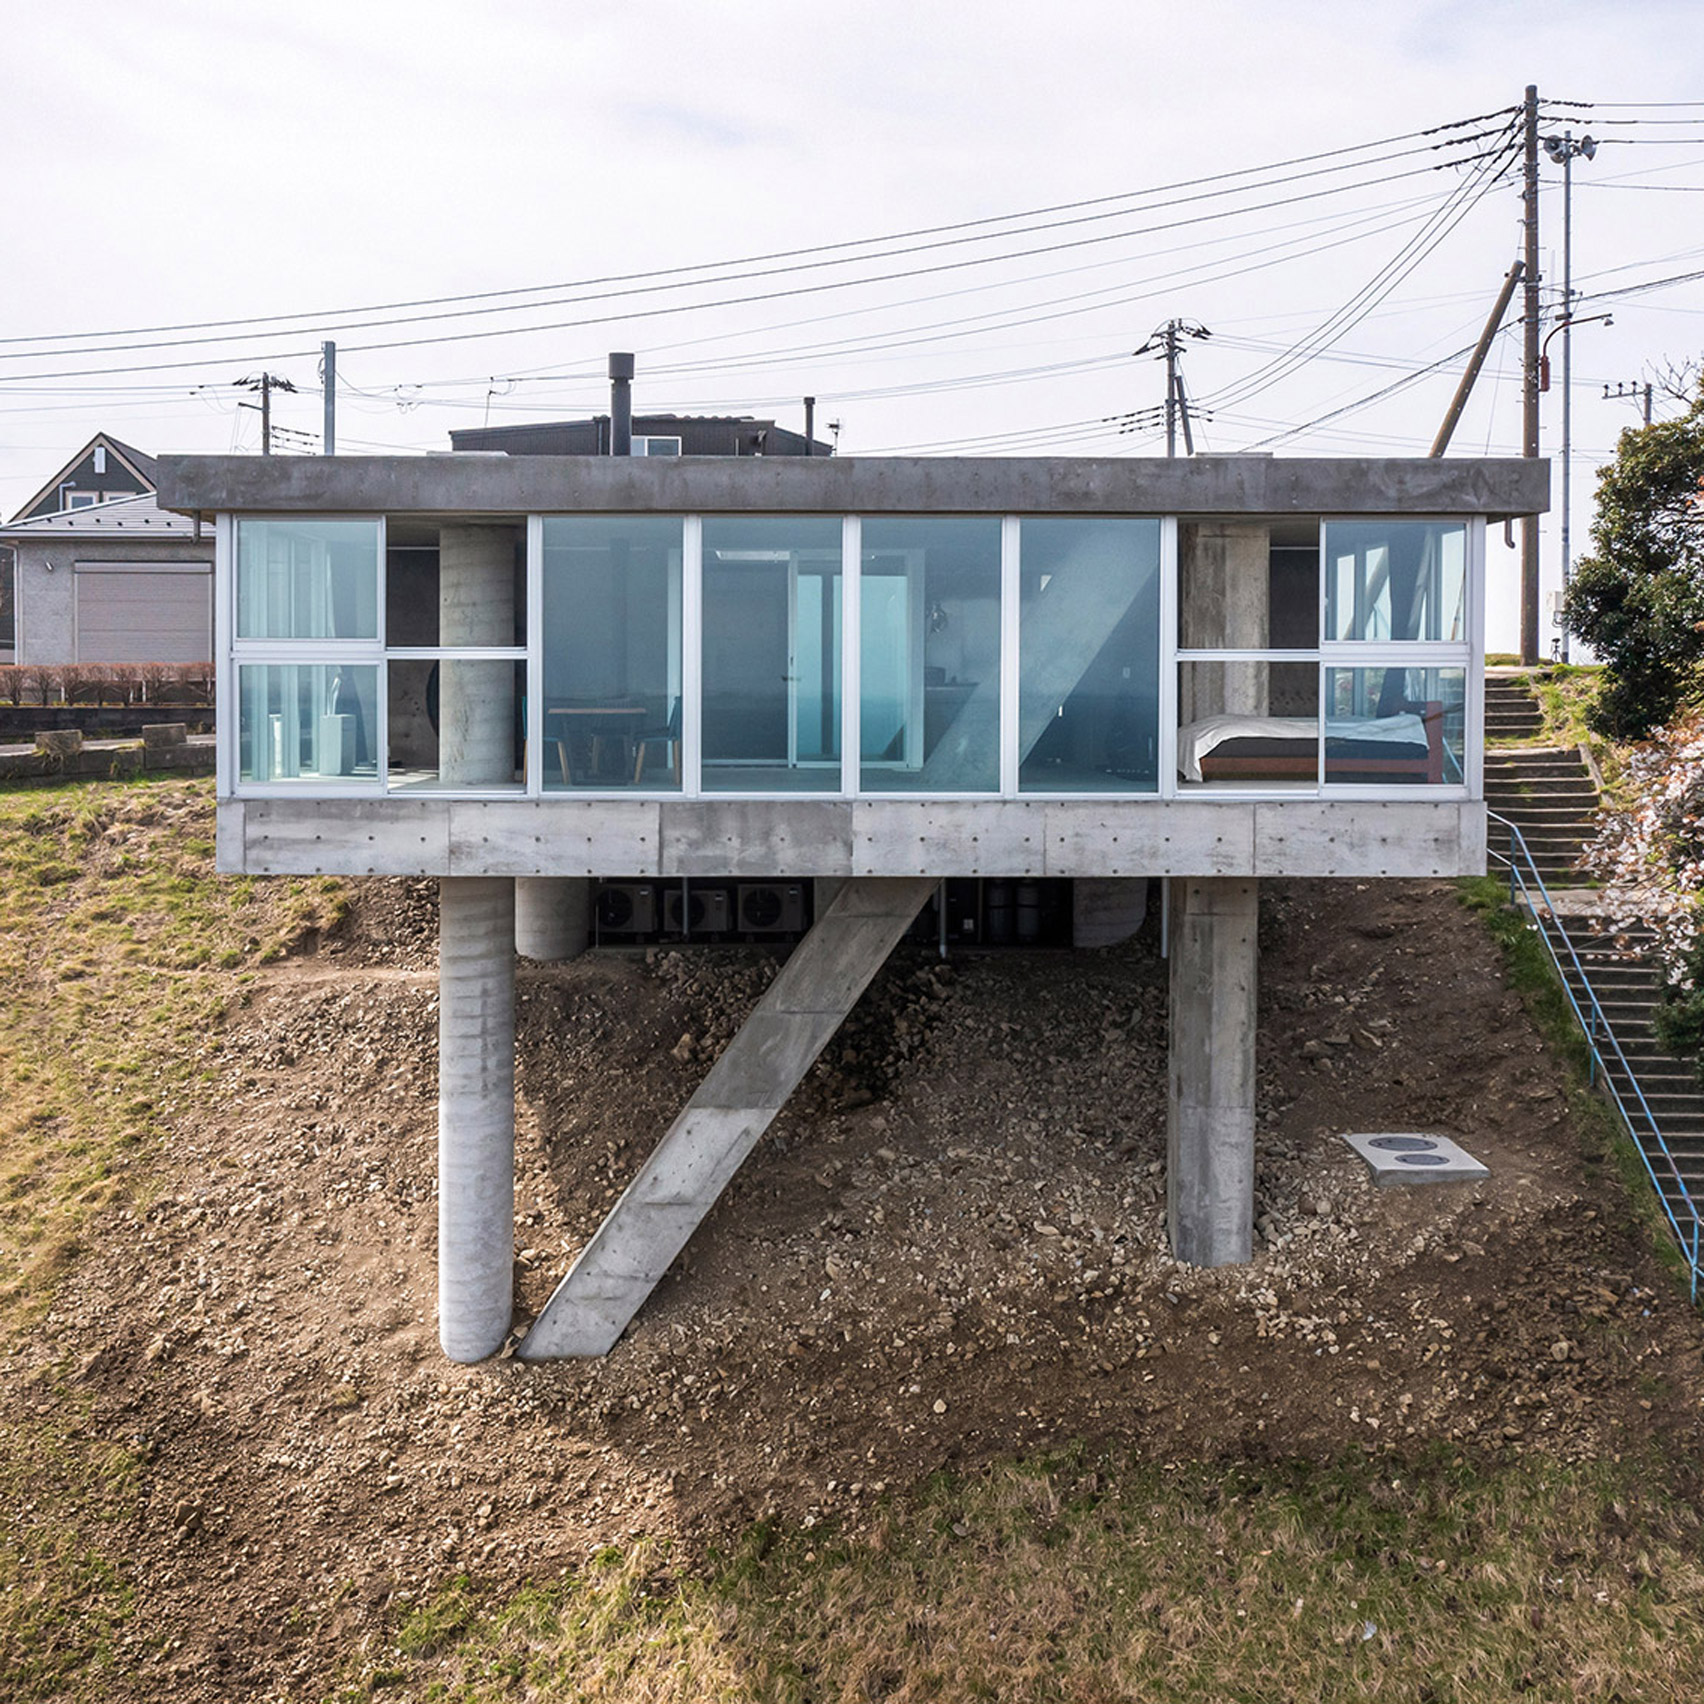 Slope Too Steep to Build? Not for This Backyard Office Addition